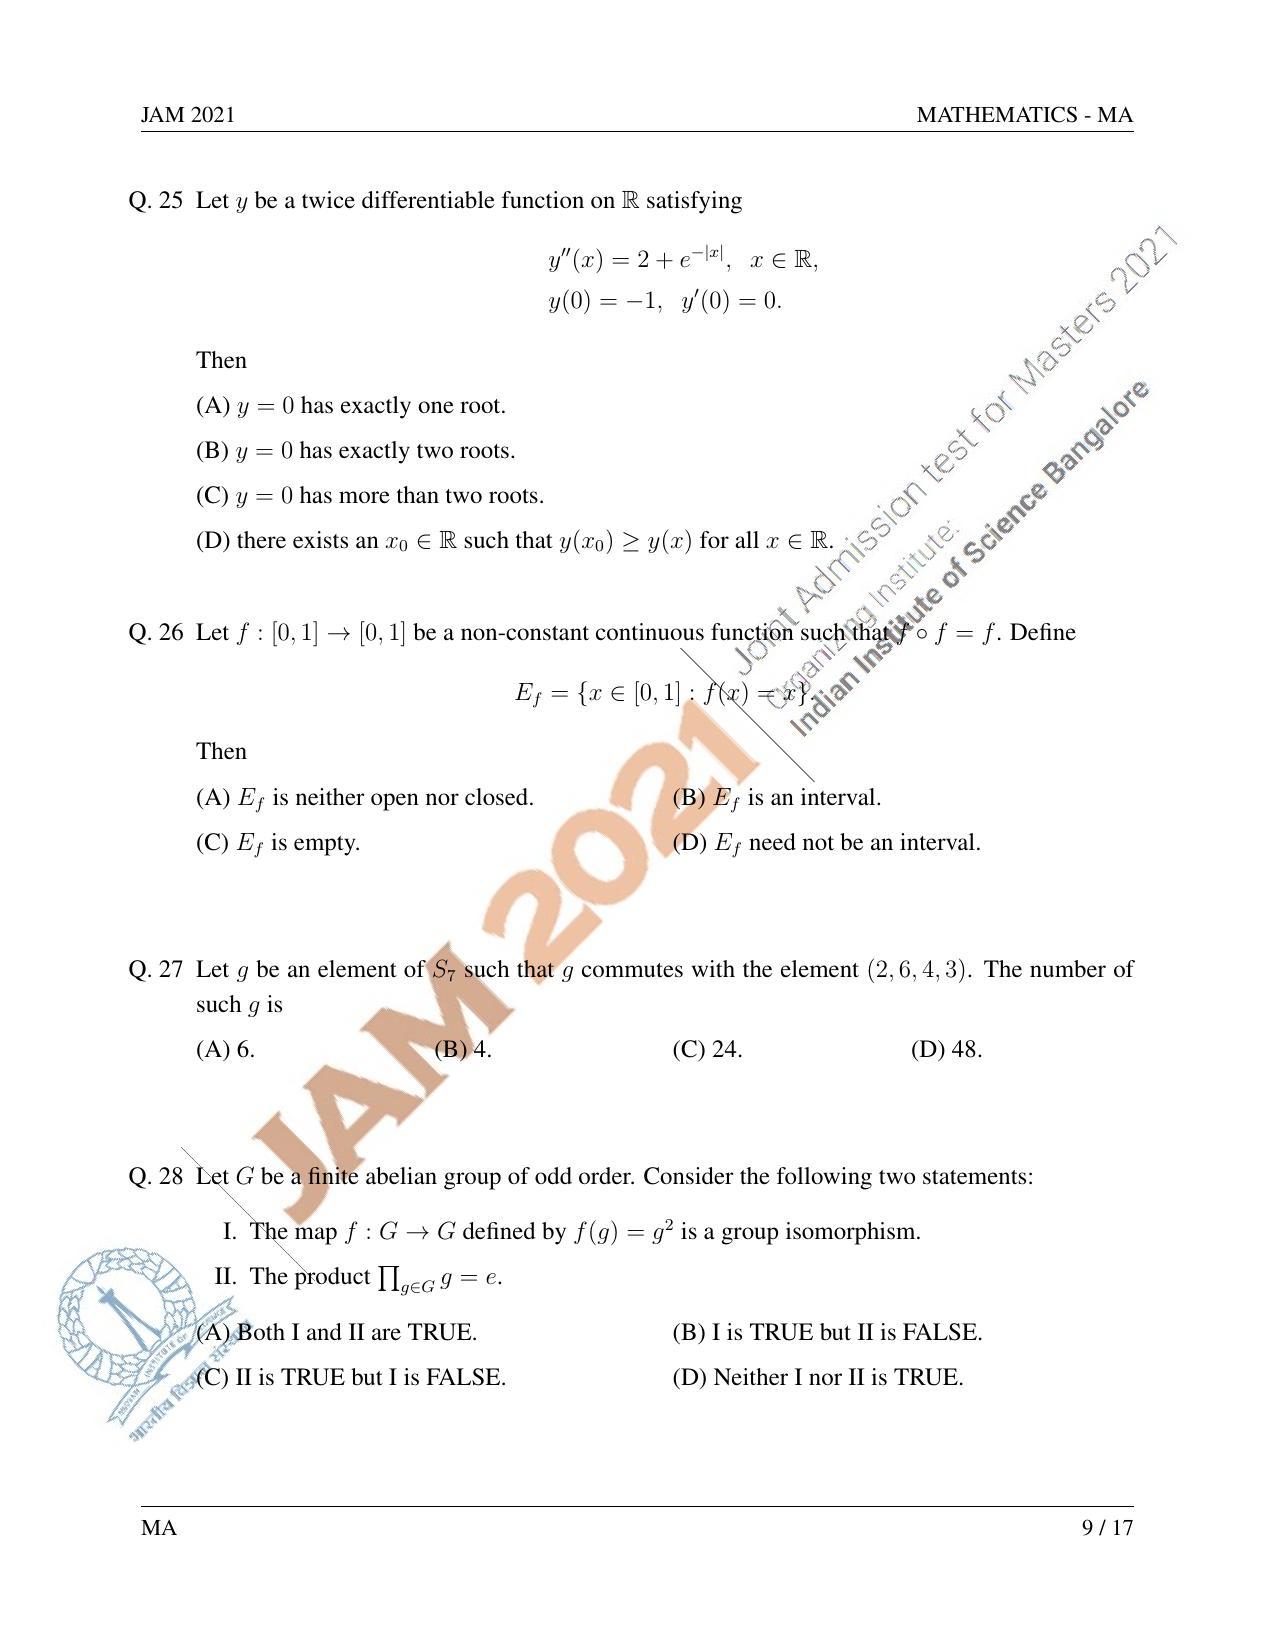 JAM 2021: MA Question Paper - Page 10